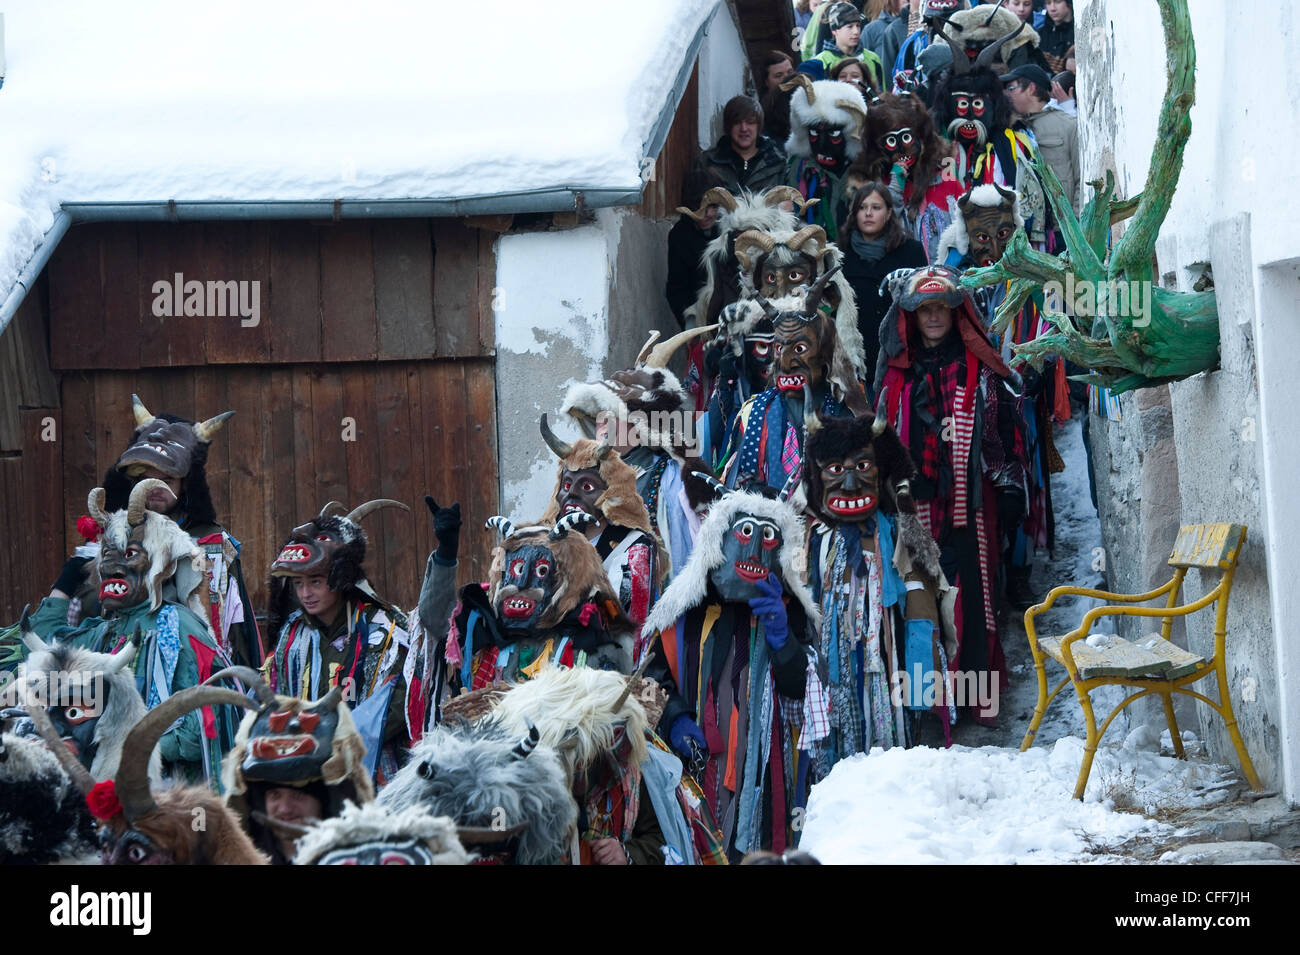 People in disguise and with masks in winter, Stilfs, Vinschgau, Alto Adige, South Tyrol, Italy, Europe Stock Photo